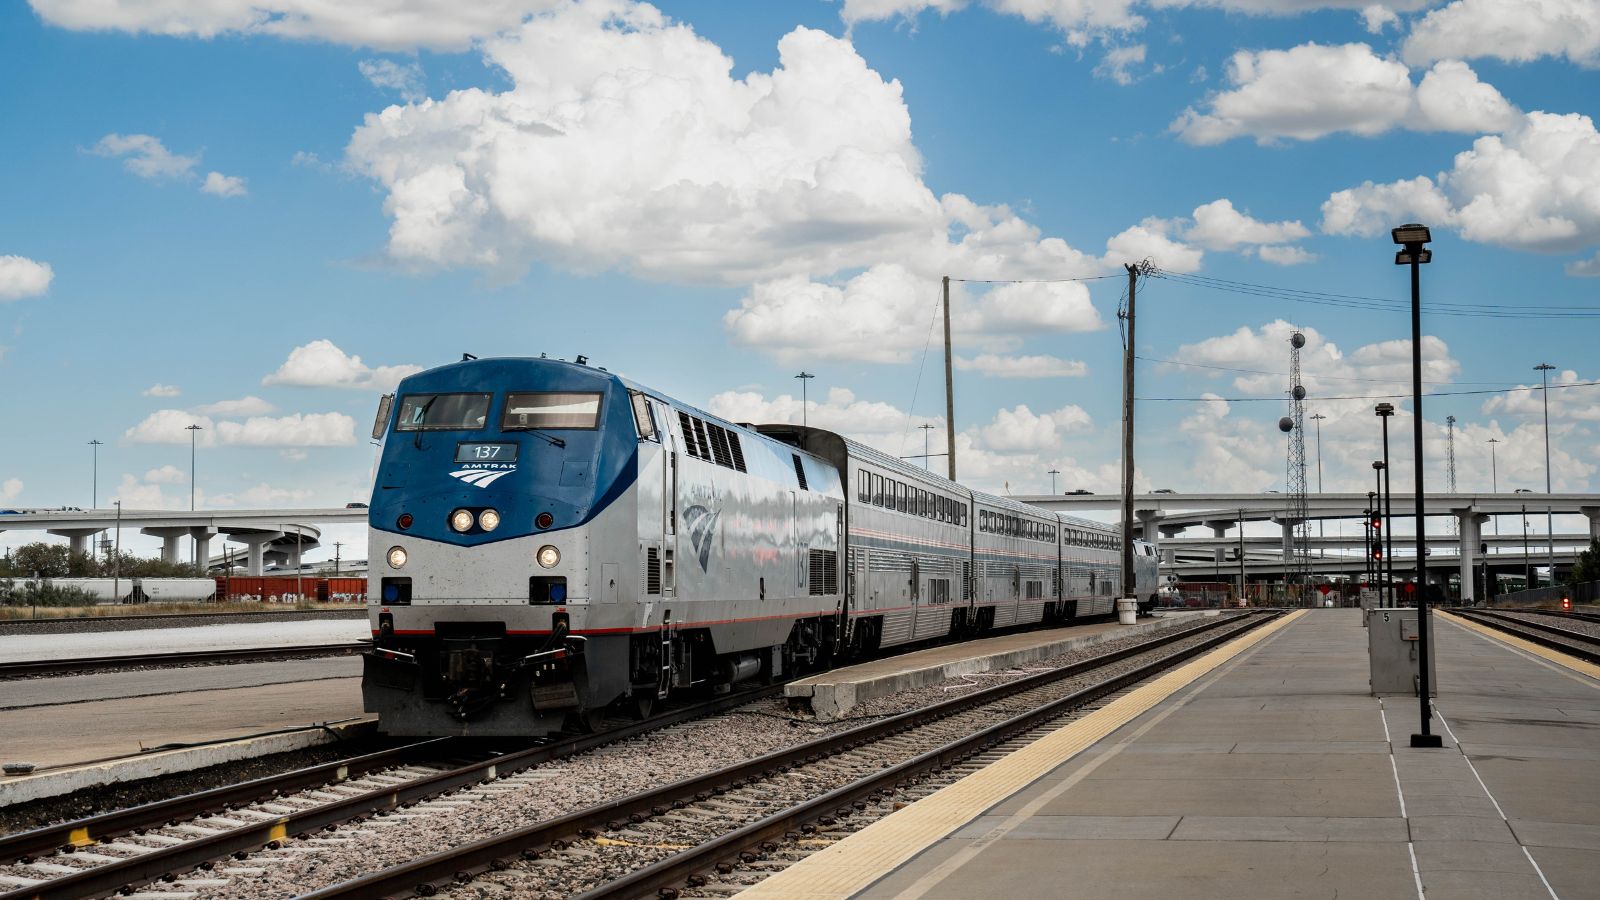 I booked an Amtrak Sleeper Car. Here's what I wish I'd known first